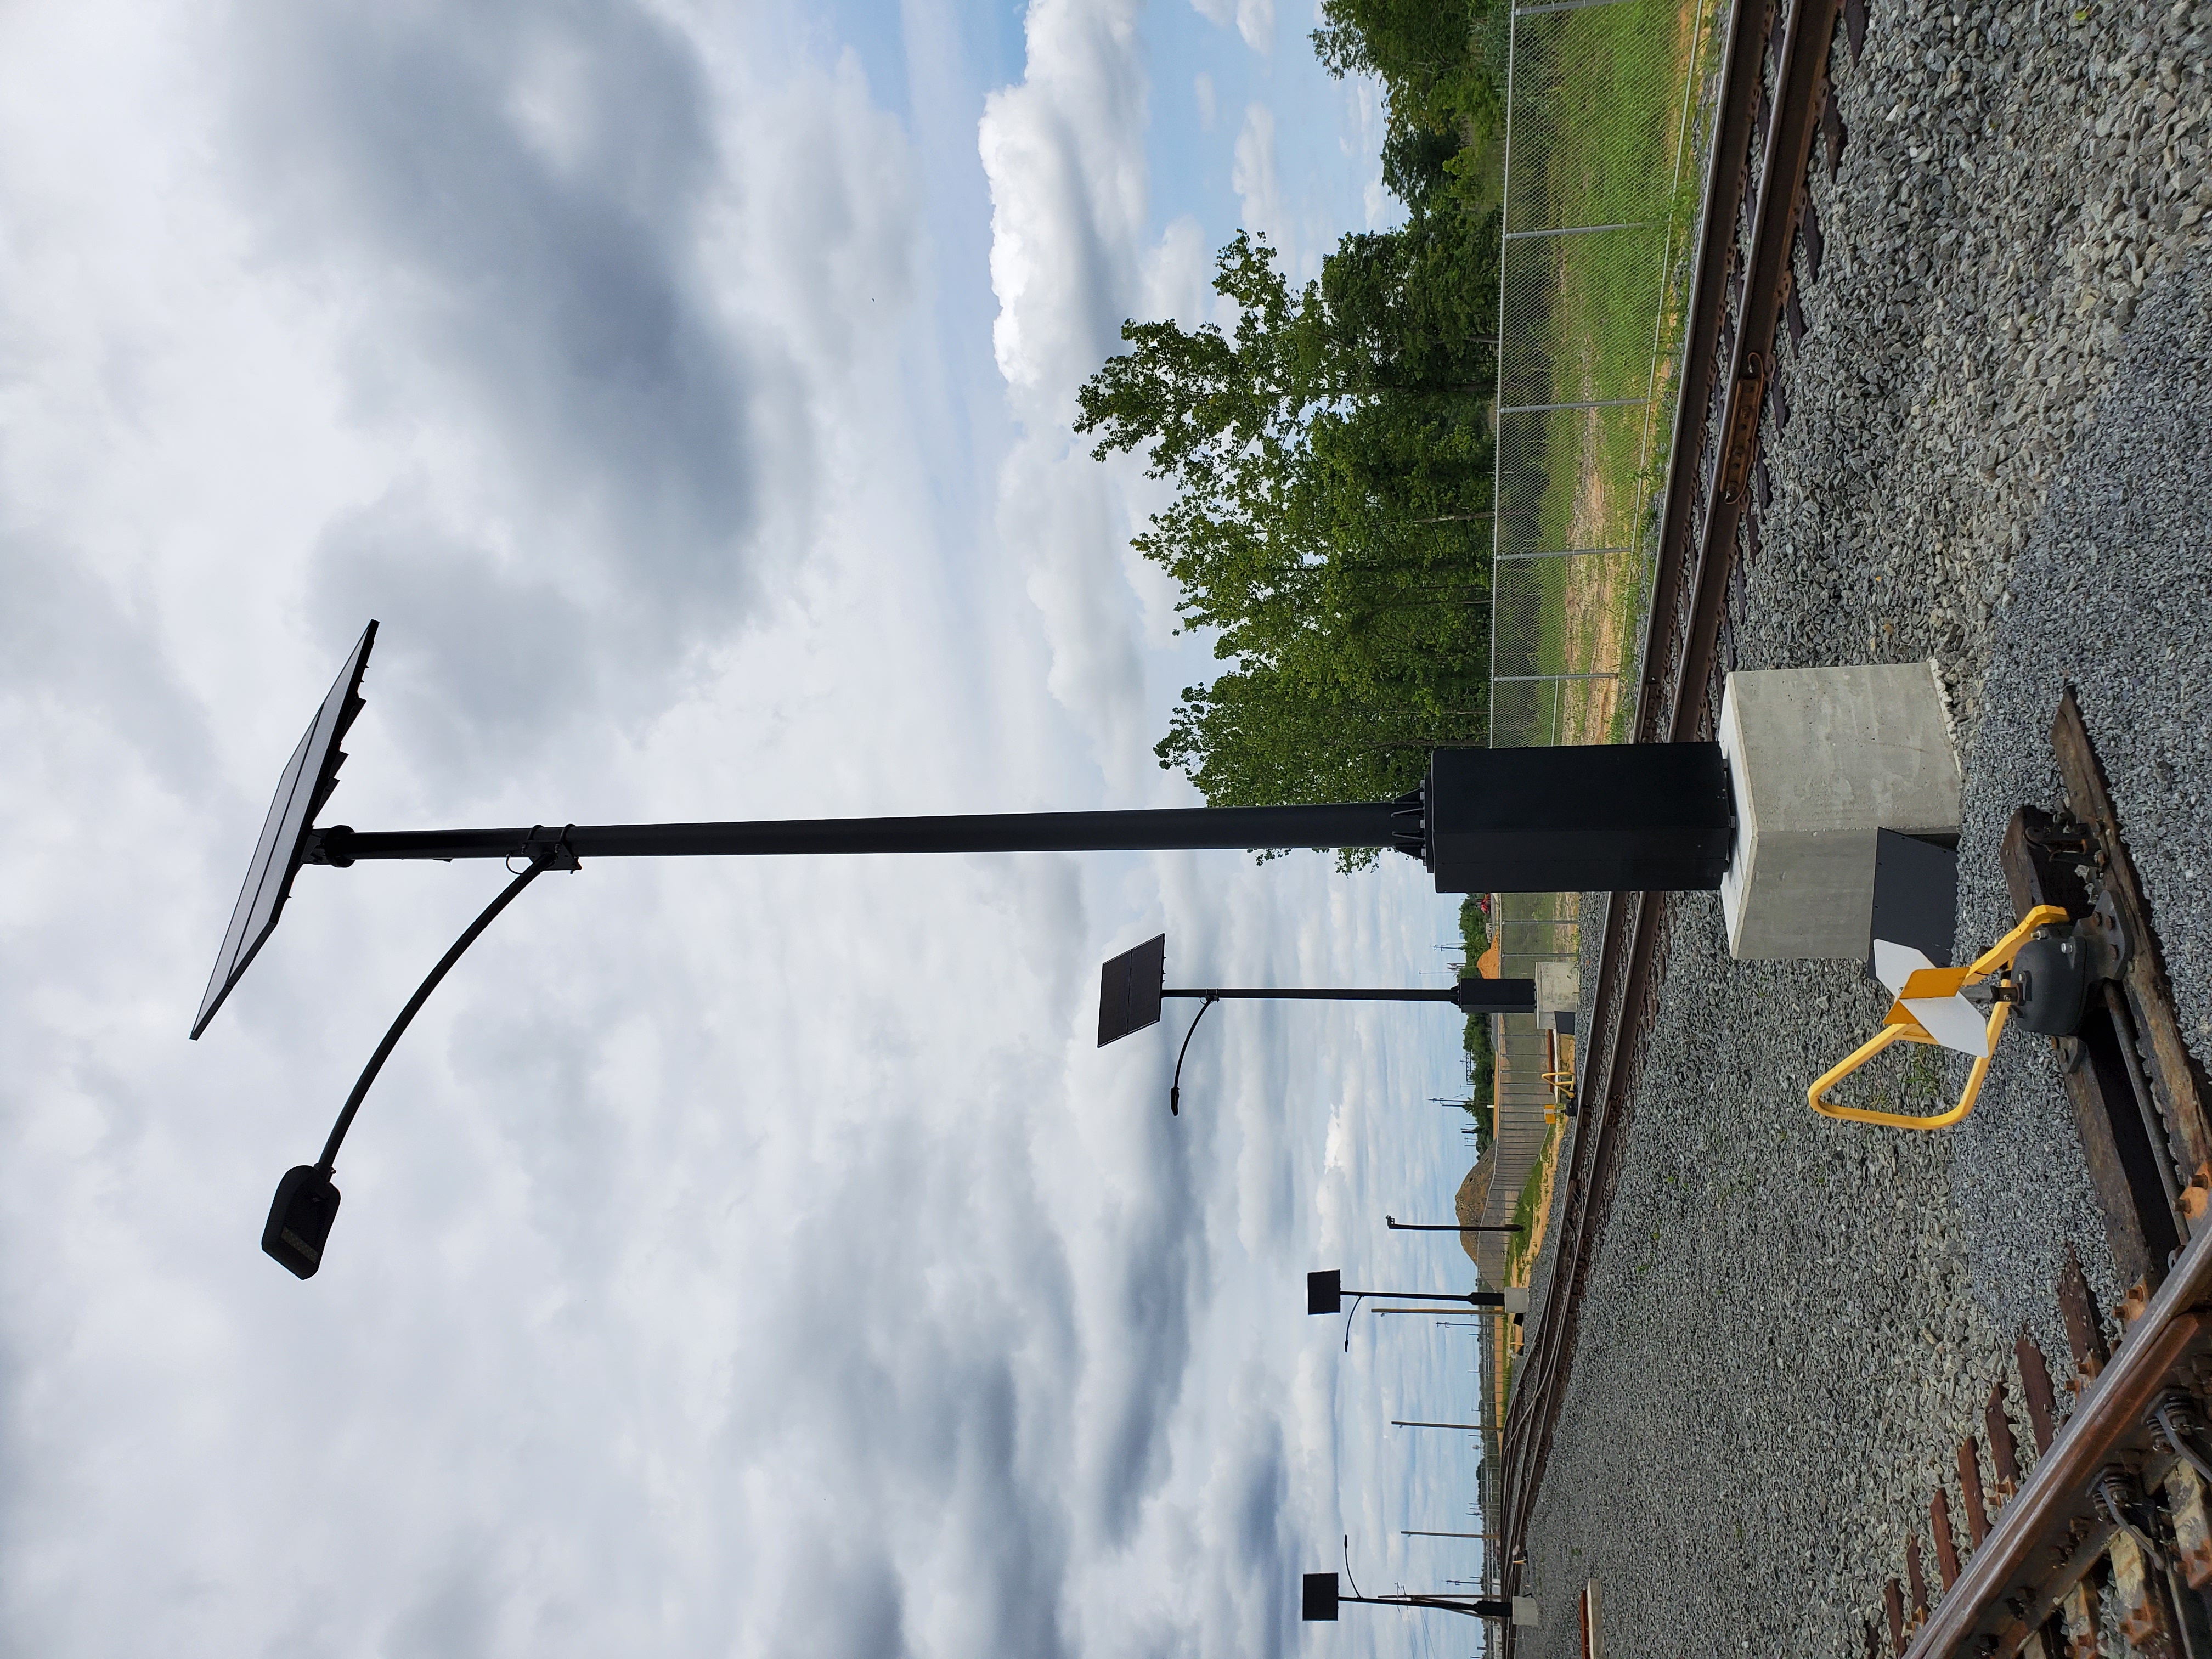 Illumient Lighting For Mission-Critical Railway Switchyard